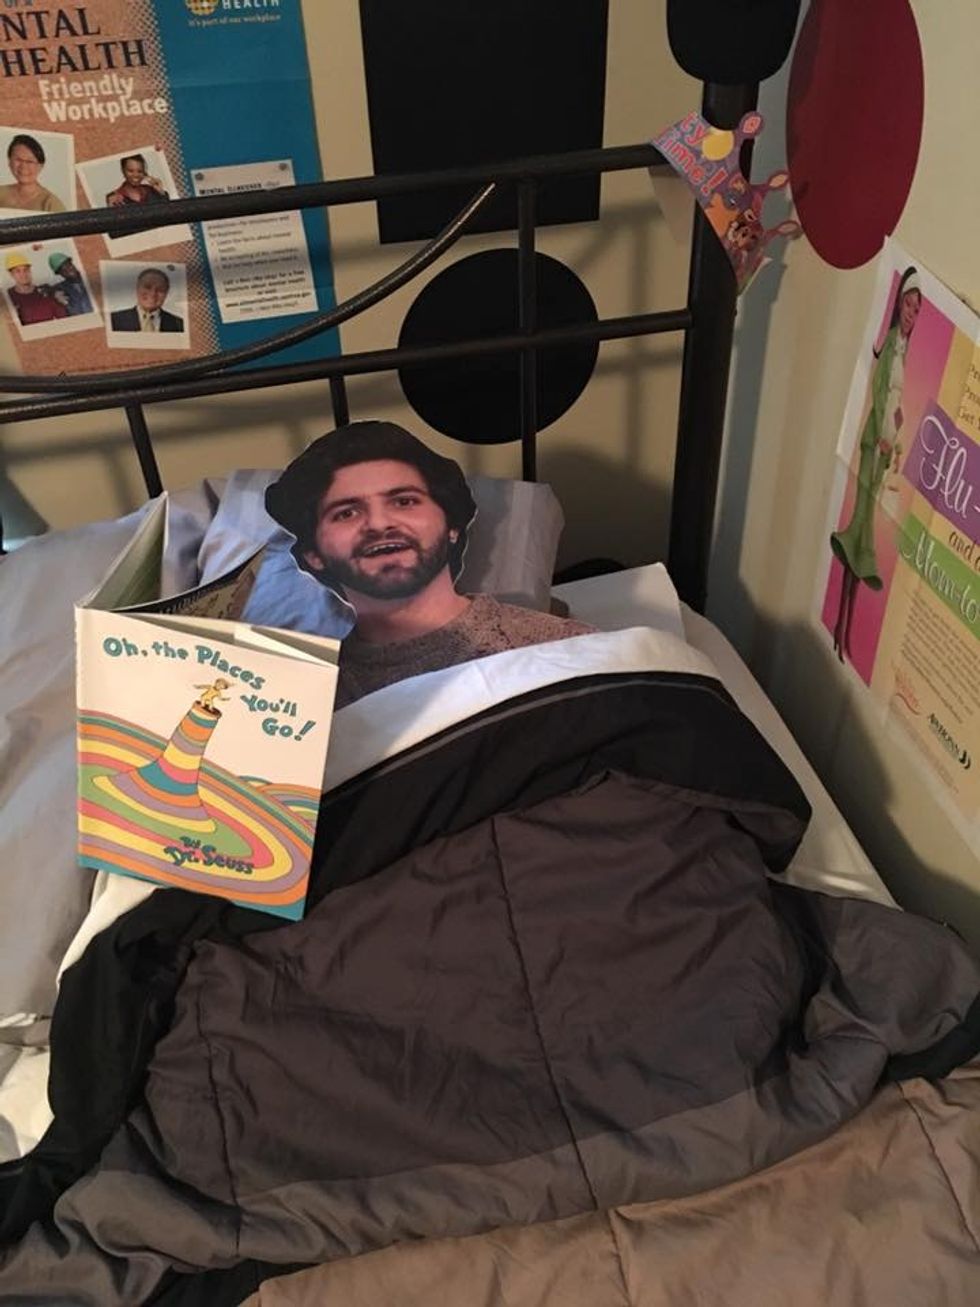 Dr. Seuess, bedtime story, community